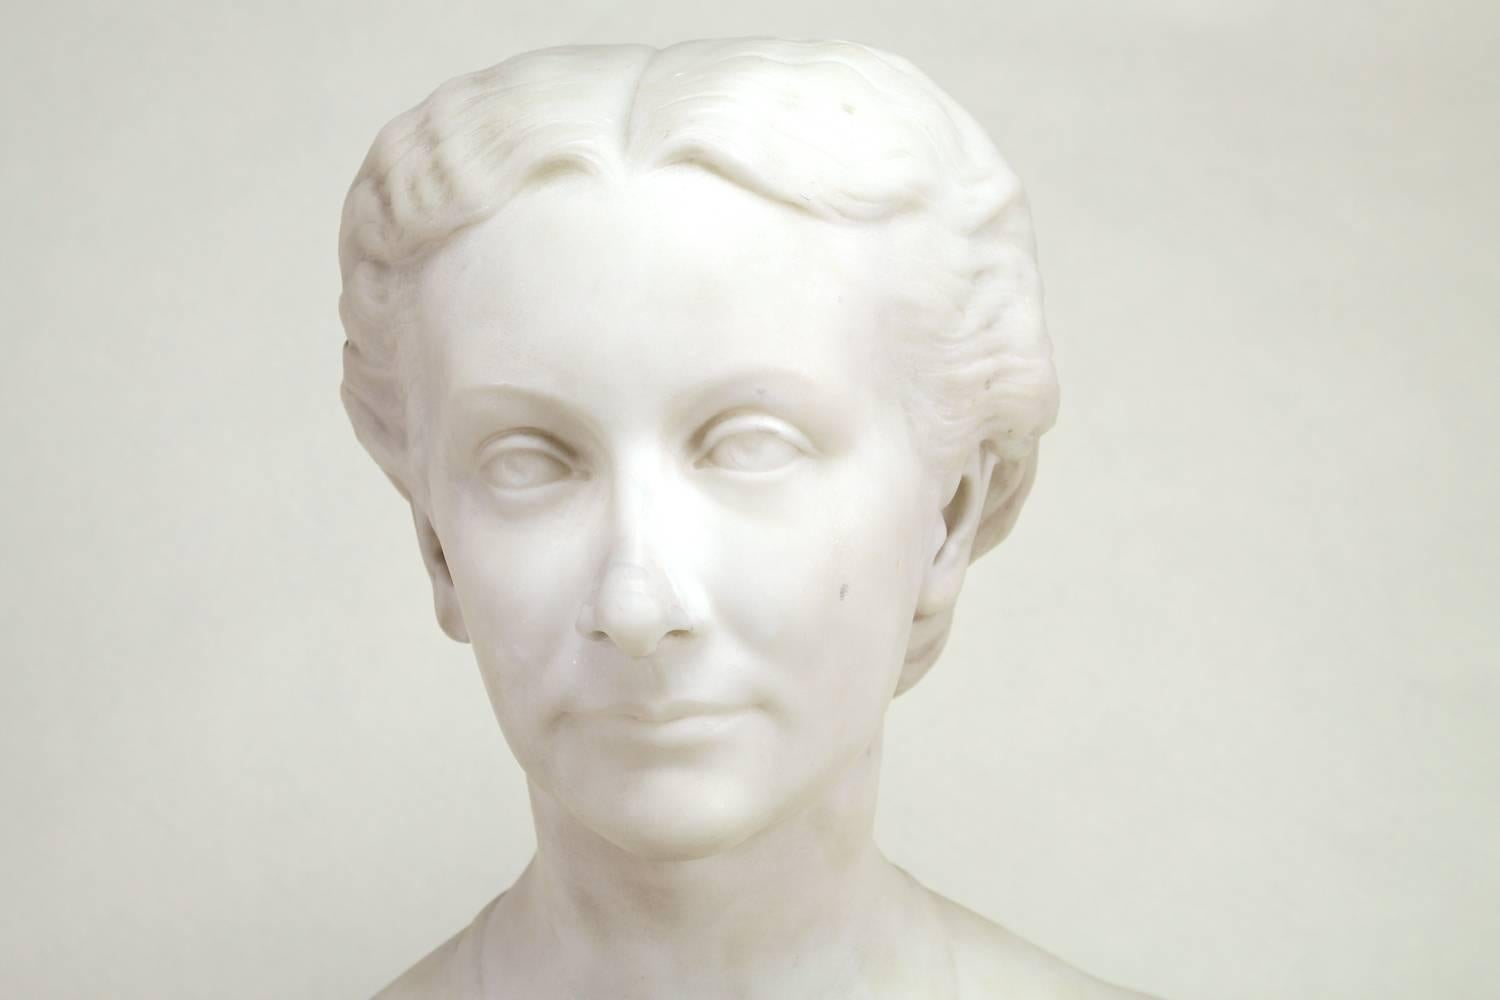 Marble bust of Mrs. Martha Maria Molyneux (wife of W.H. Molyneux 1797-1868), dated 1866, small chips and a repair to the nose, signed and dated on back 